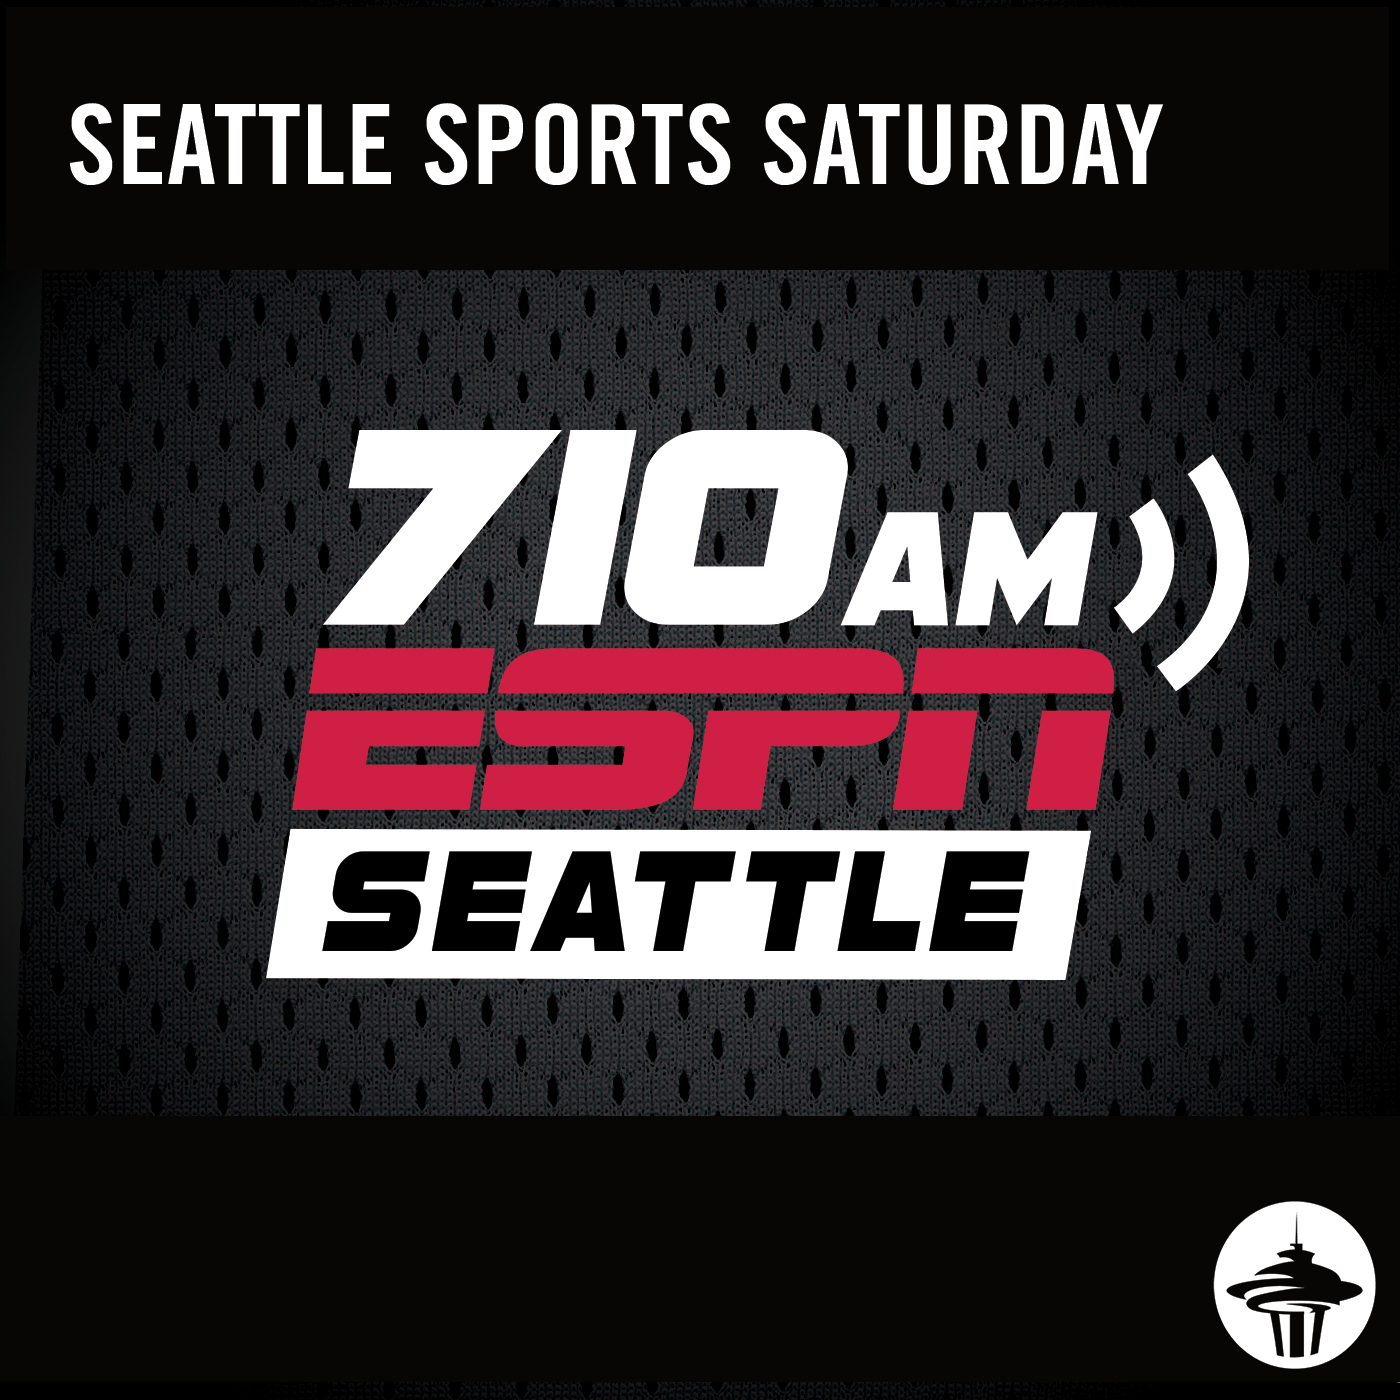 Seattle Sports Saturday: What’s the biggest issue facing the Seahawks?